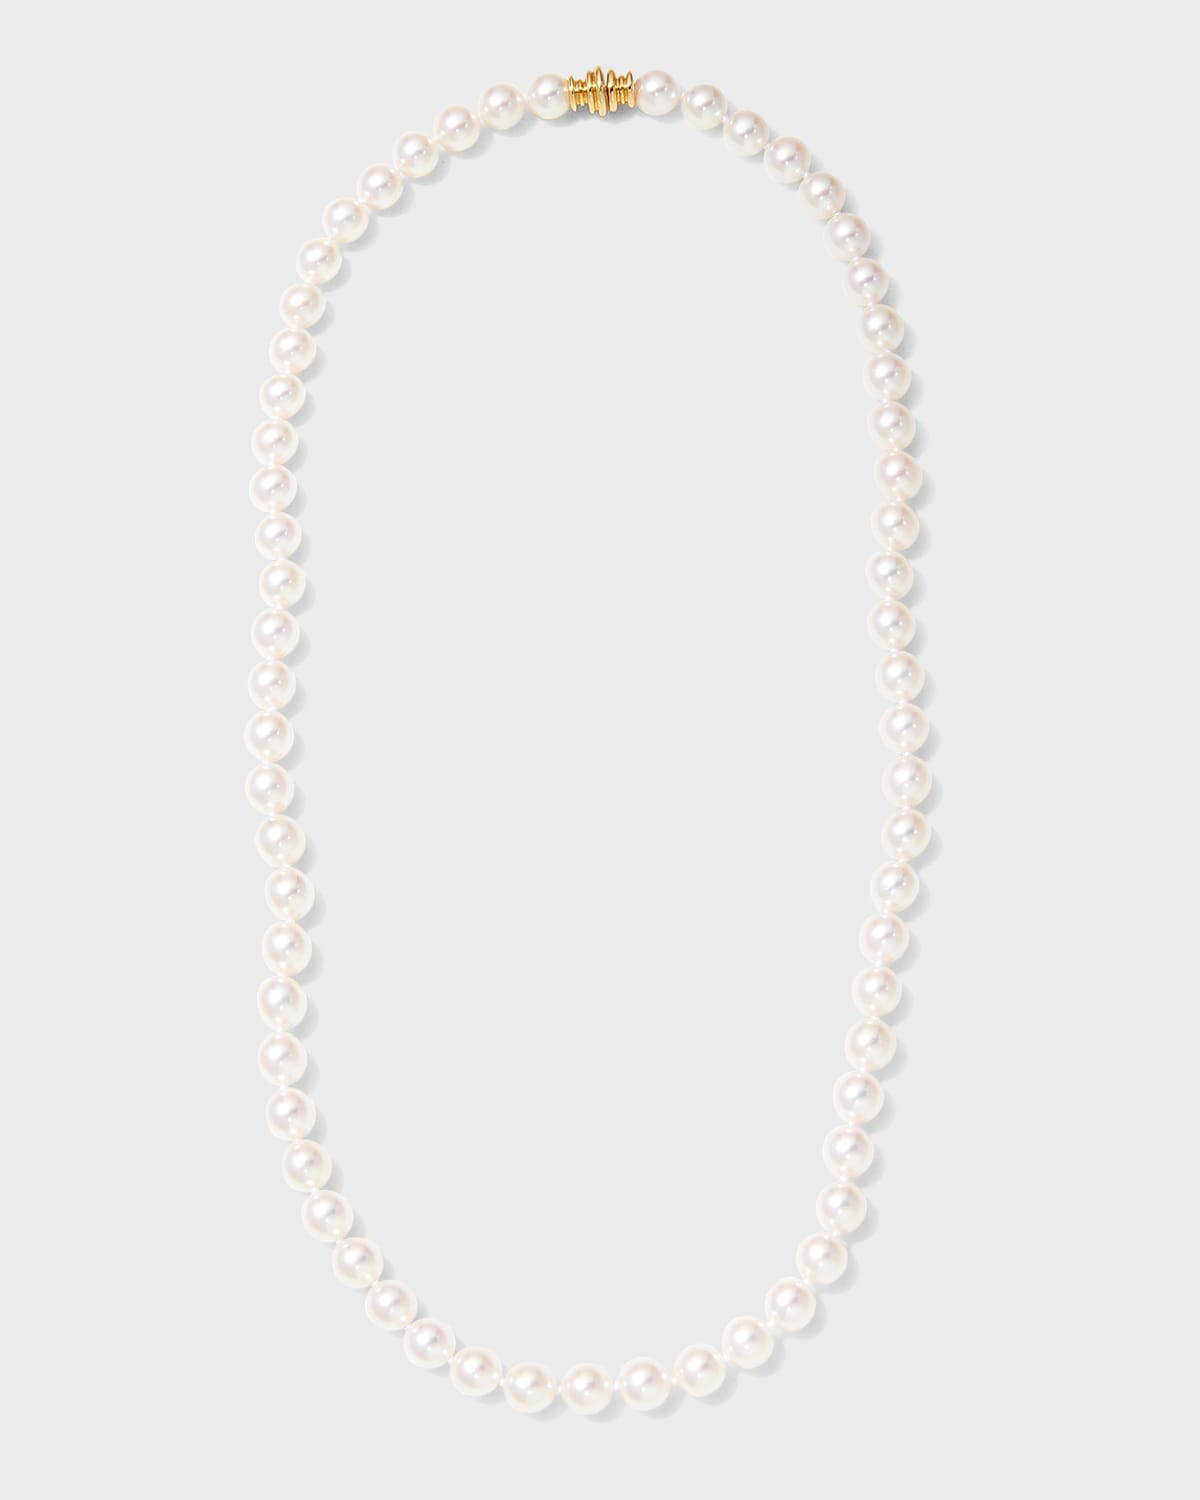 Assael 22" Akoya Cultured 8.5mm Pearl Necklace with Yellow Gold Clasp